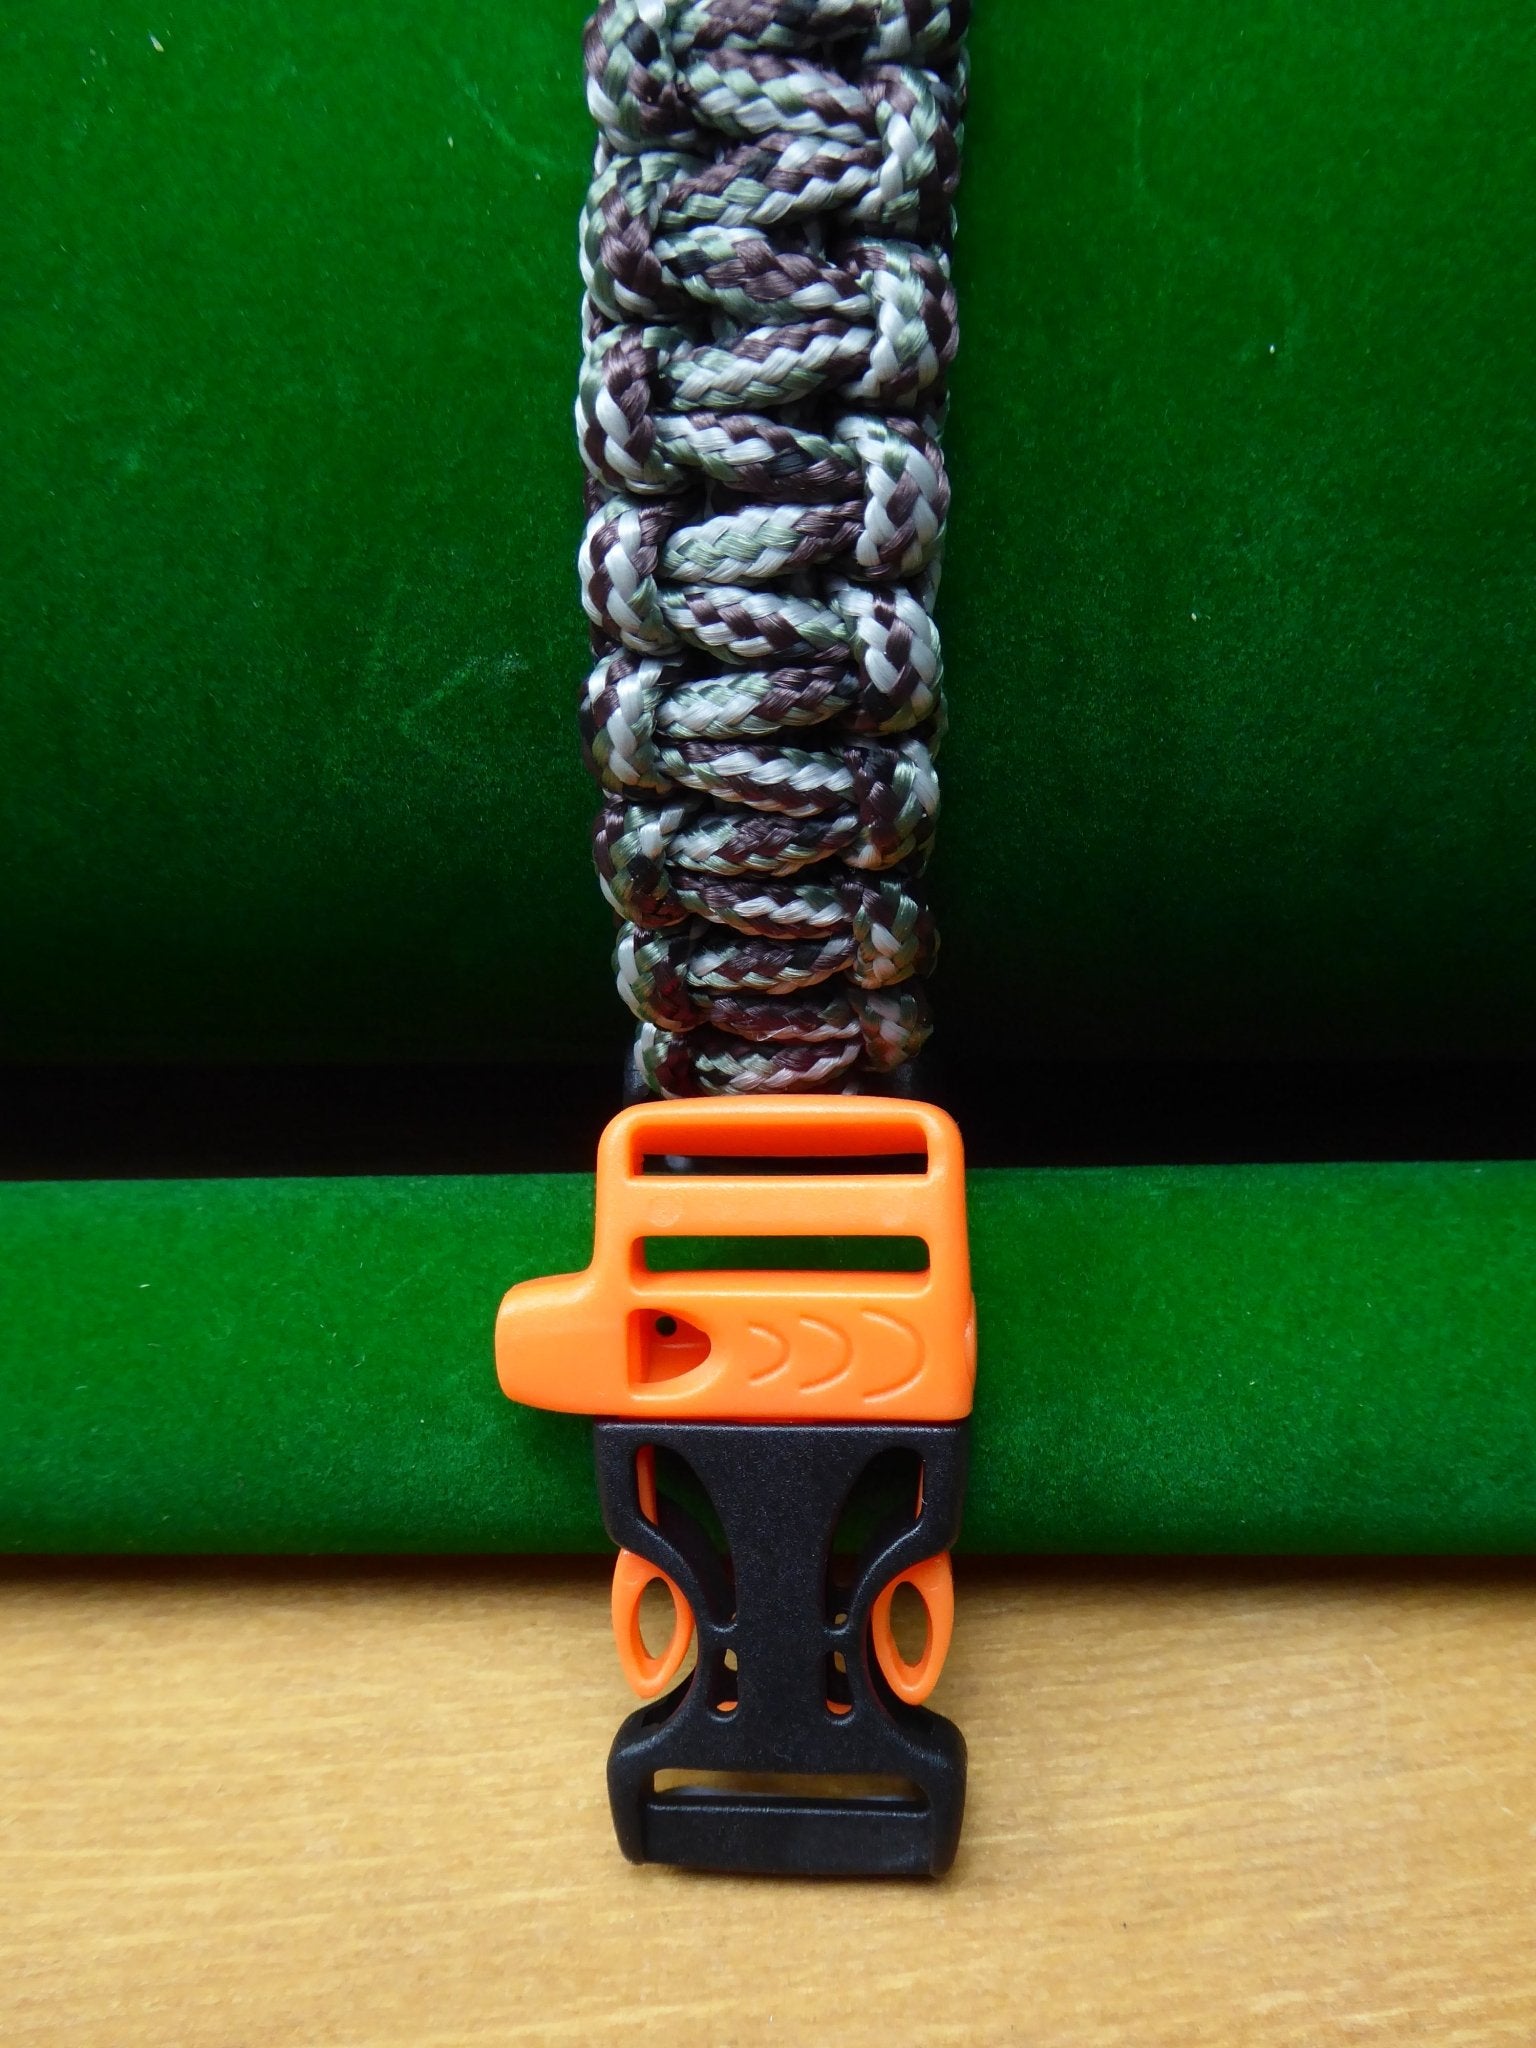 Paracord Buckle Bracelet kits with choice of colours Paracord Huggins Attic Silver Birch Black & Orange plastic whistle Buckle  [Huggins attic]